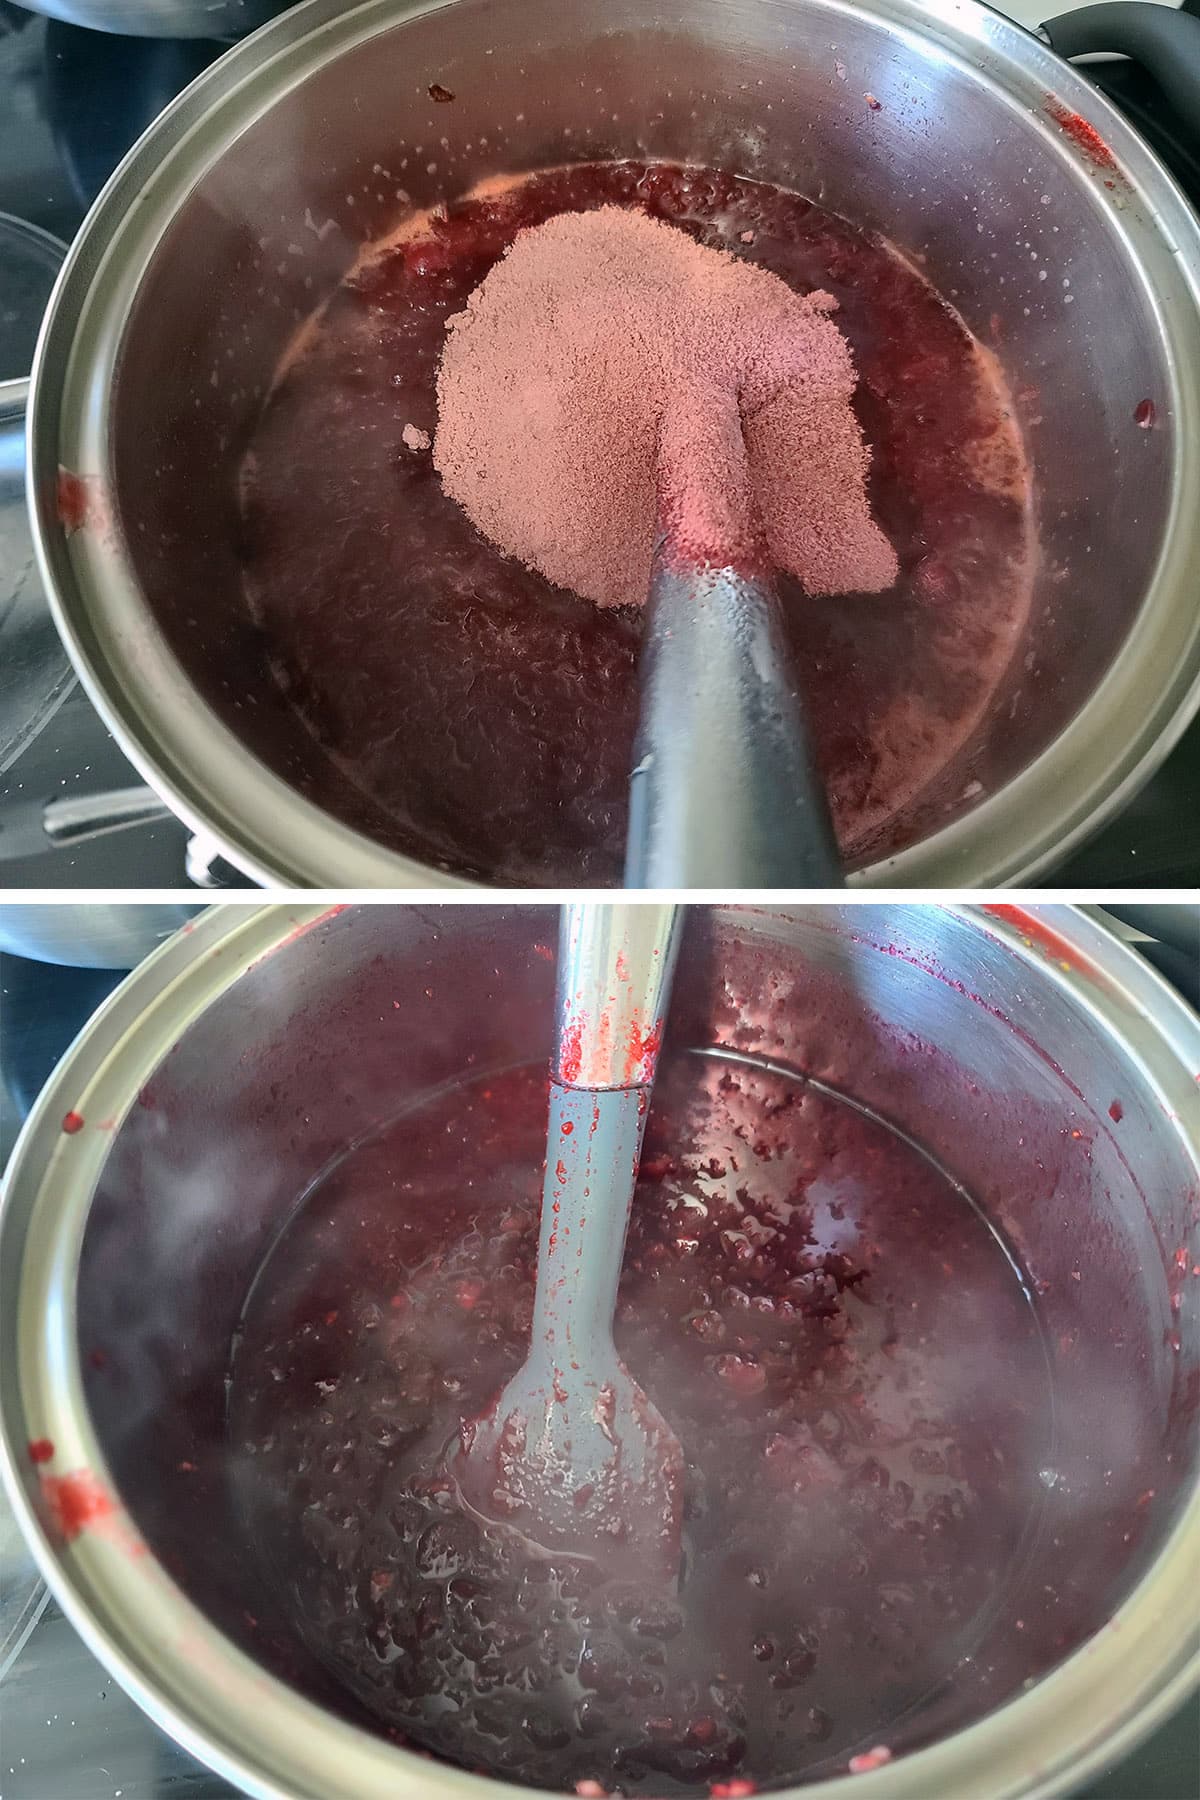 A 2 part image showing the Jello being added to the pot and stirred in.